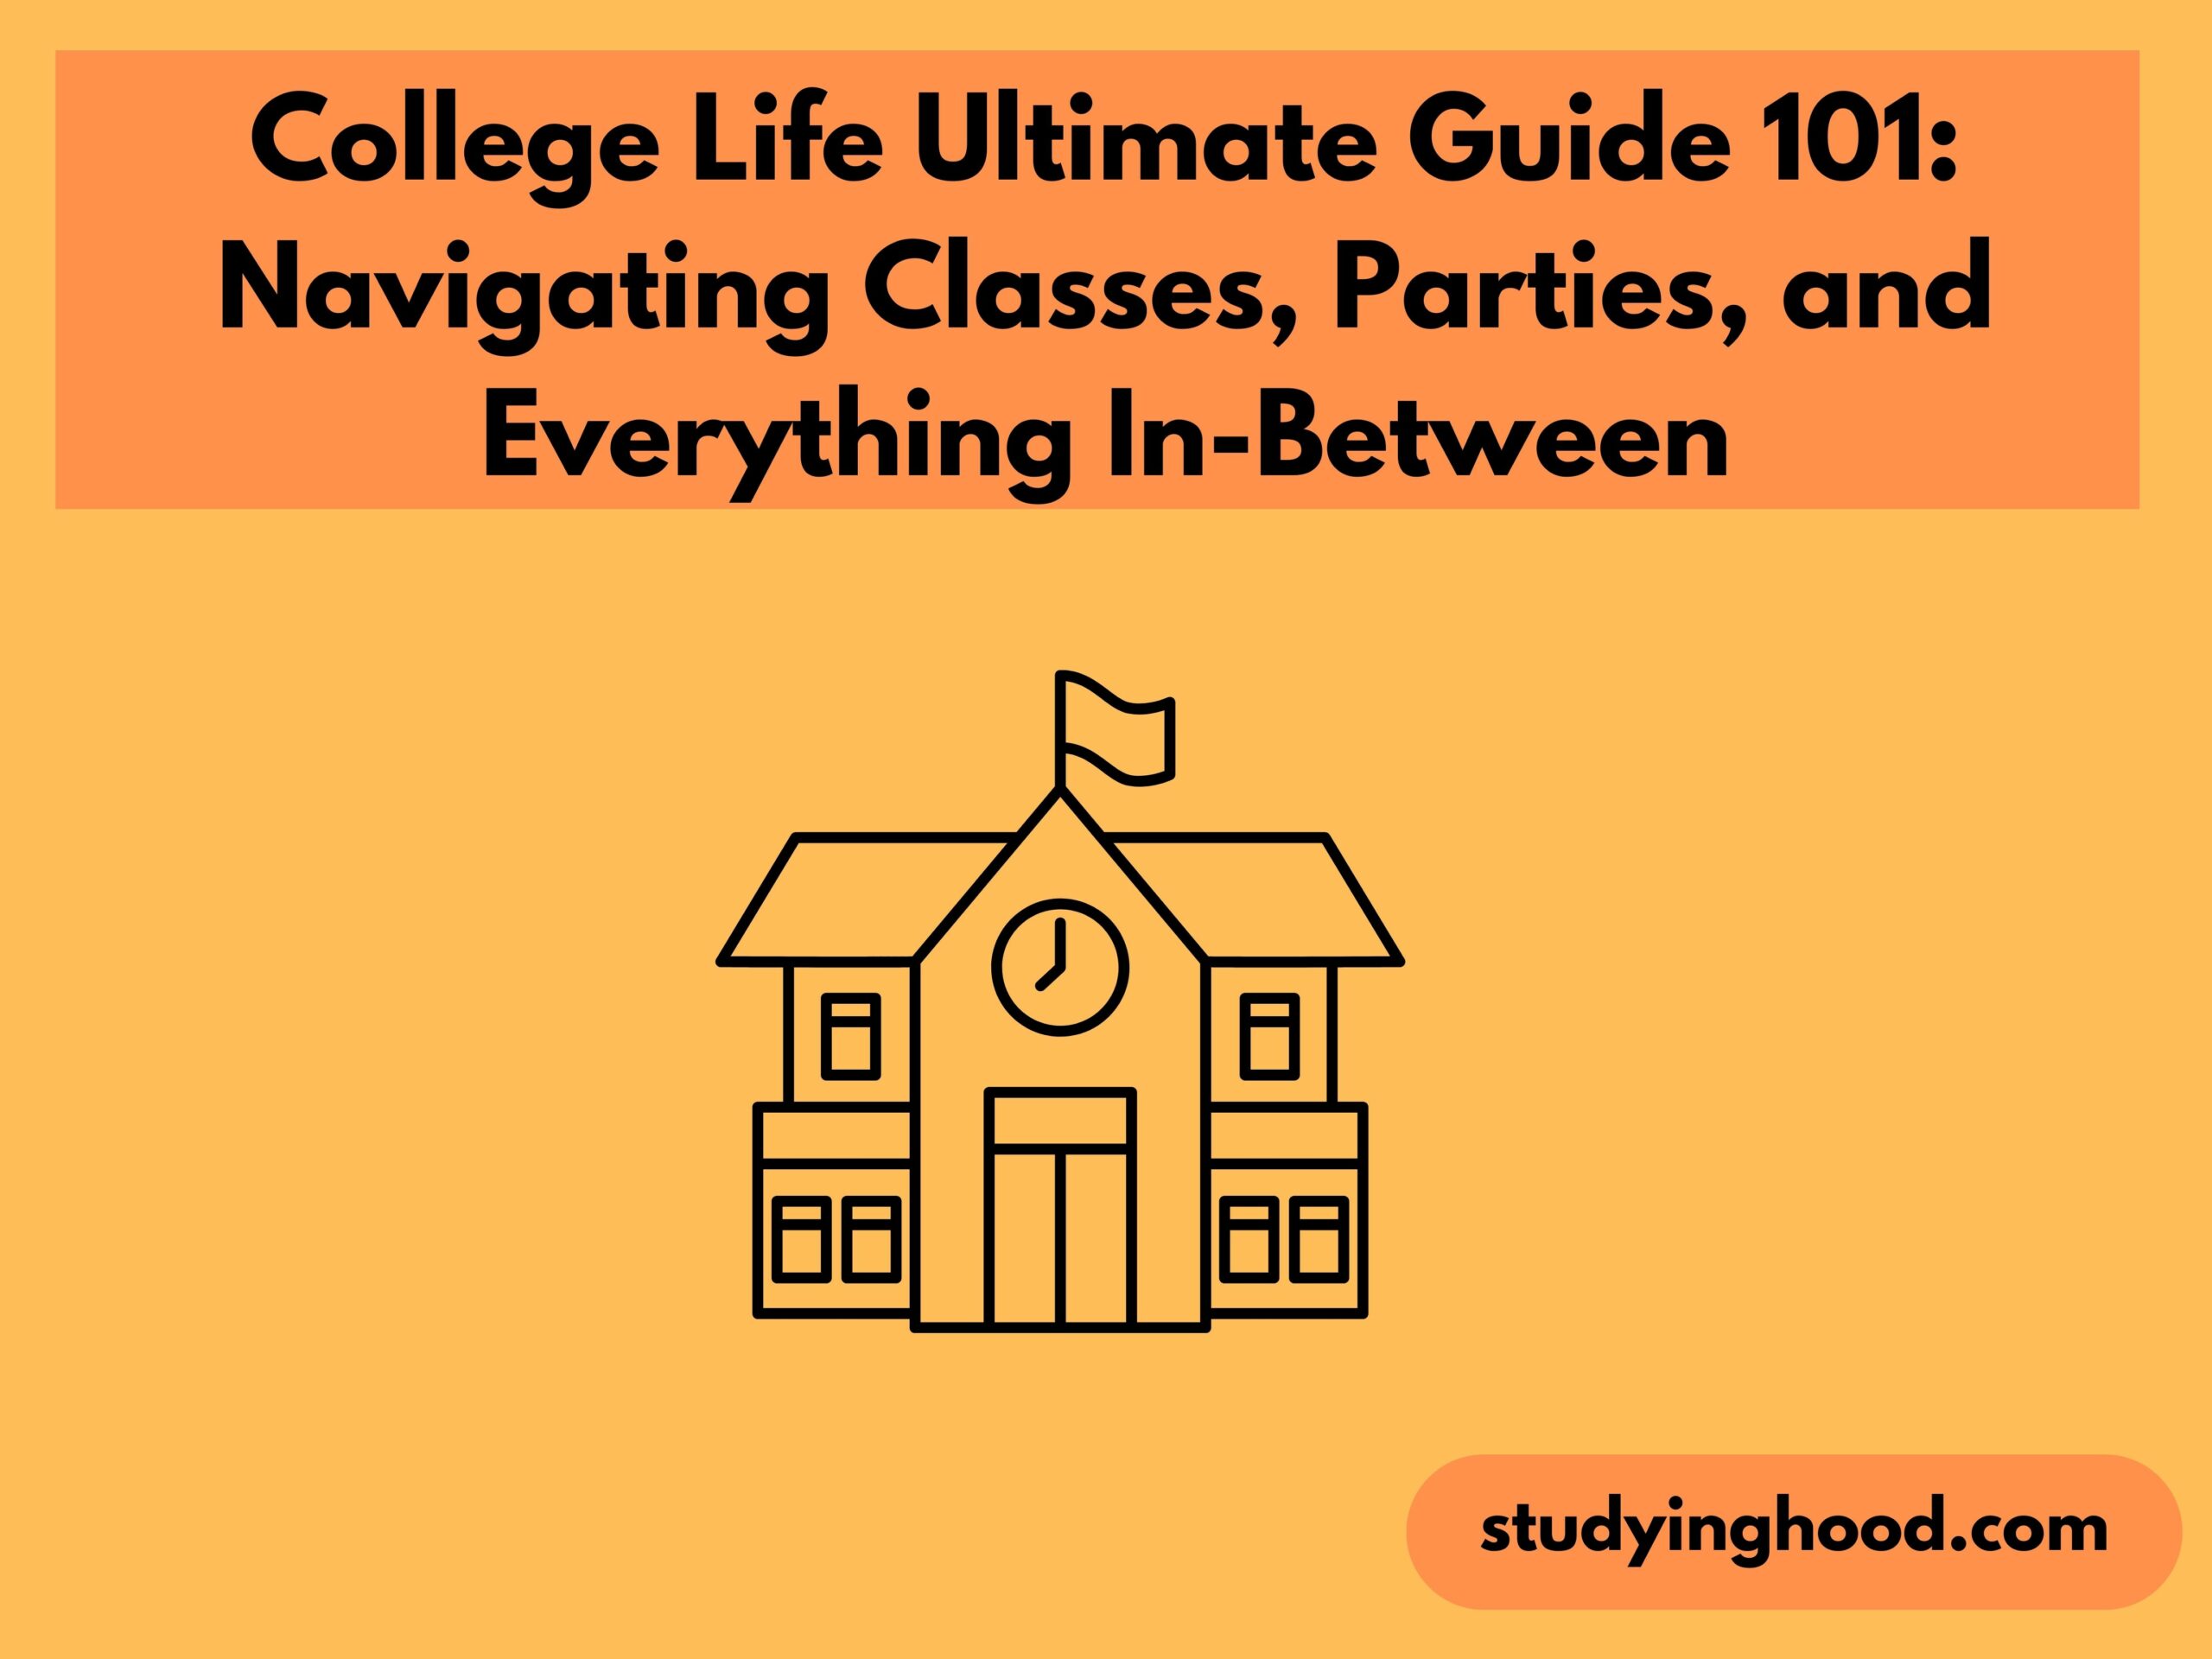 College Life Ultimate Guide 101: Navigating Classes, Parties, and Everything In-Between